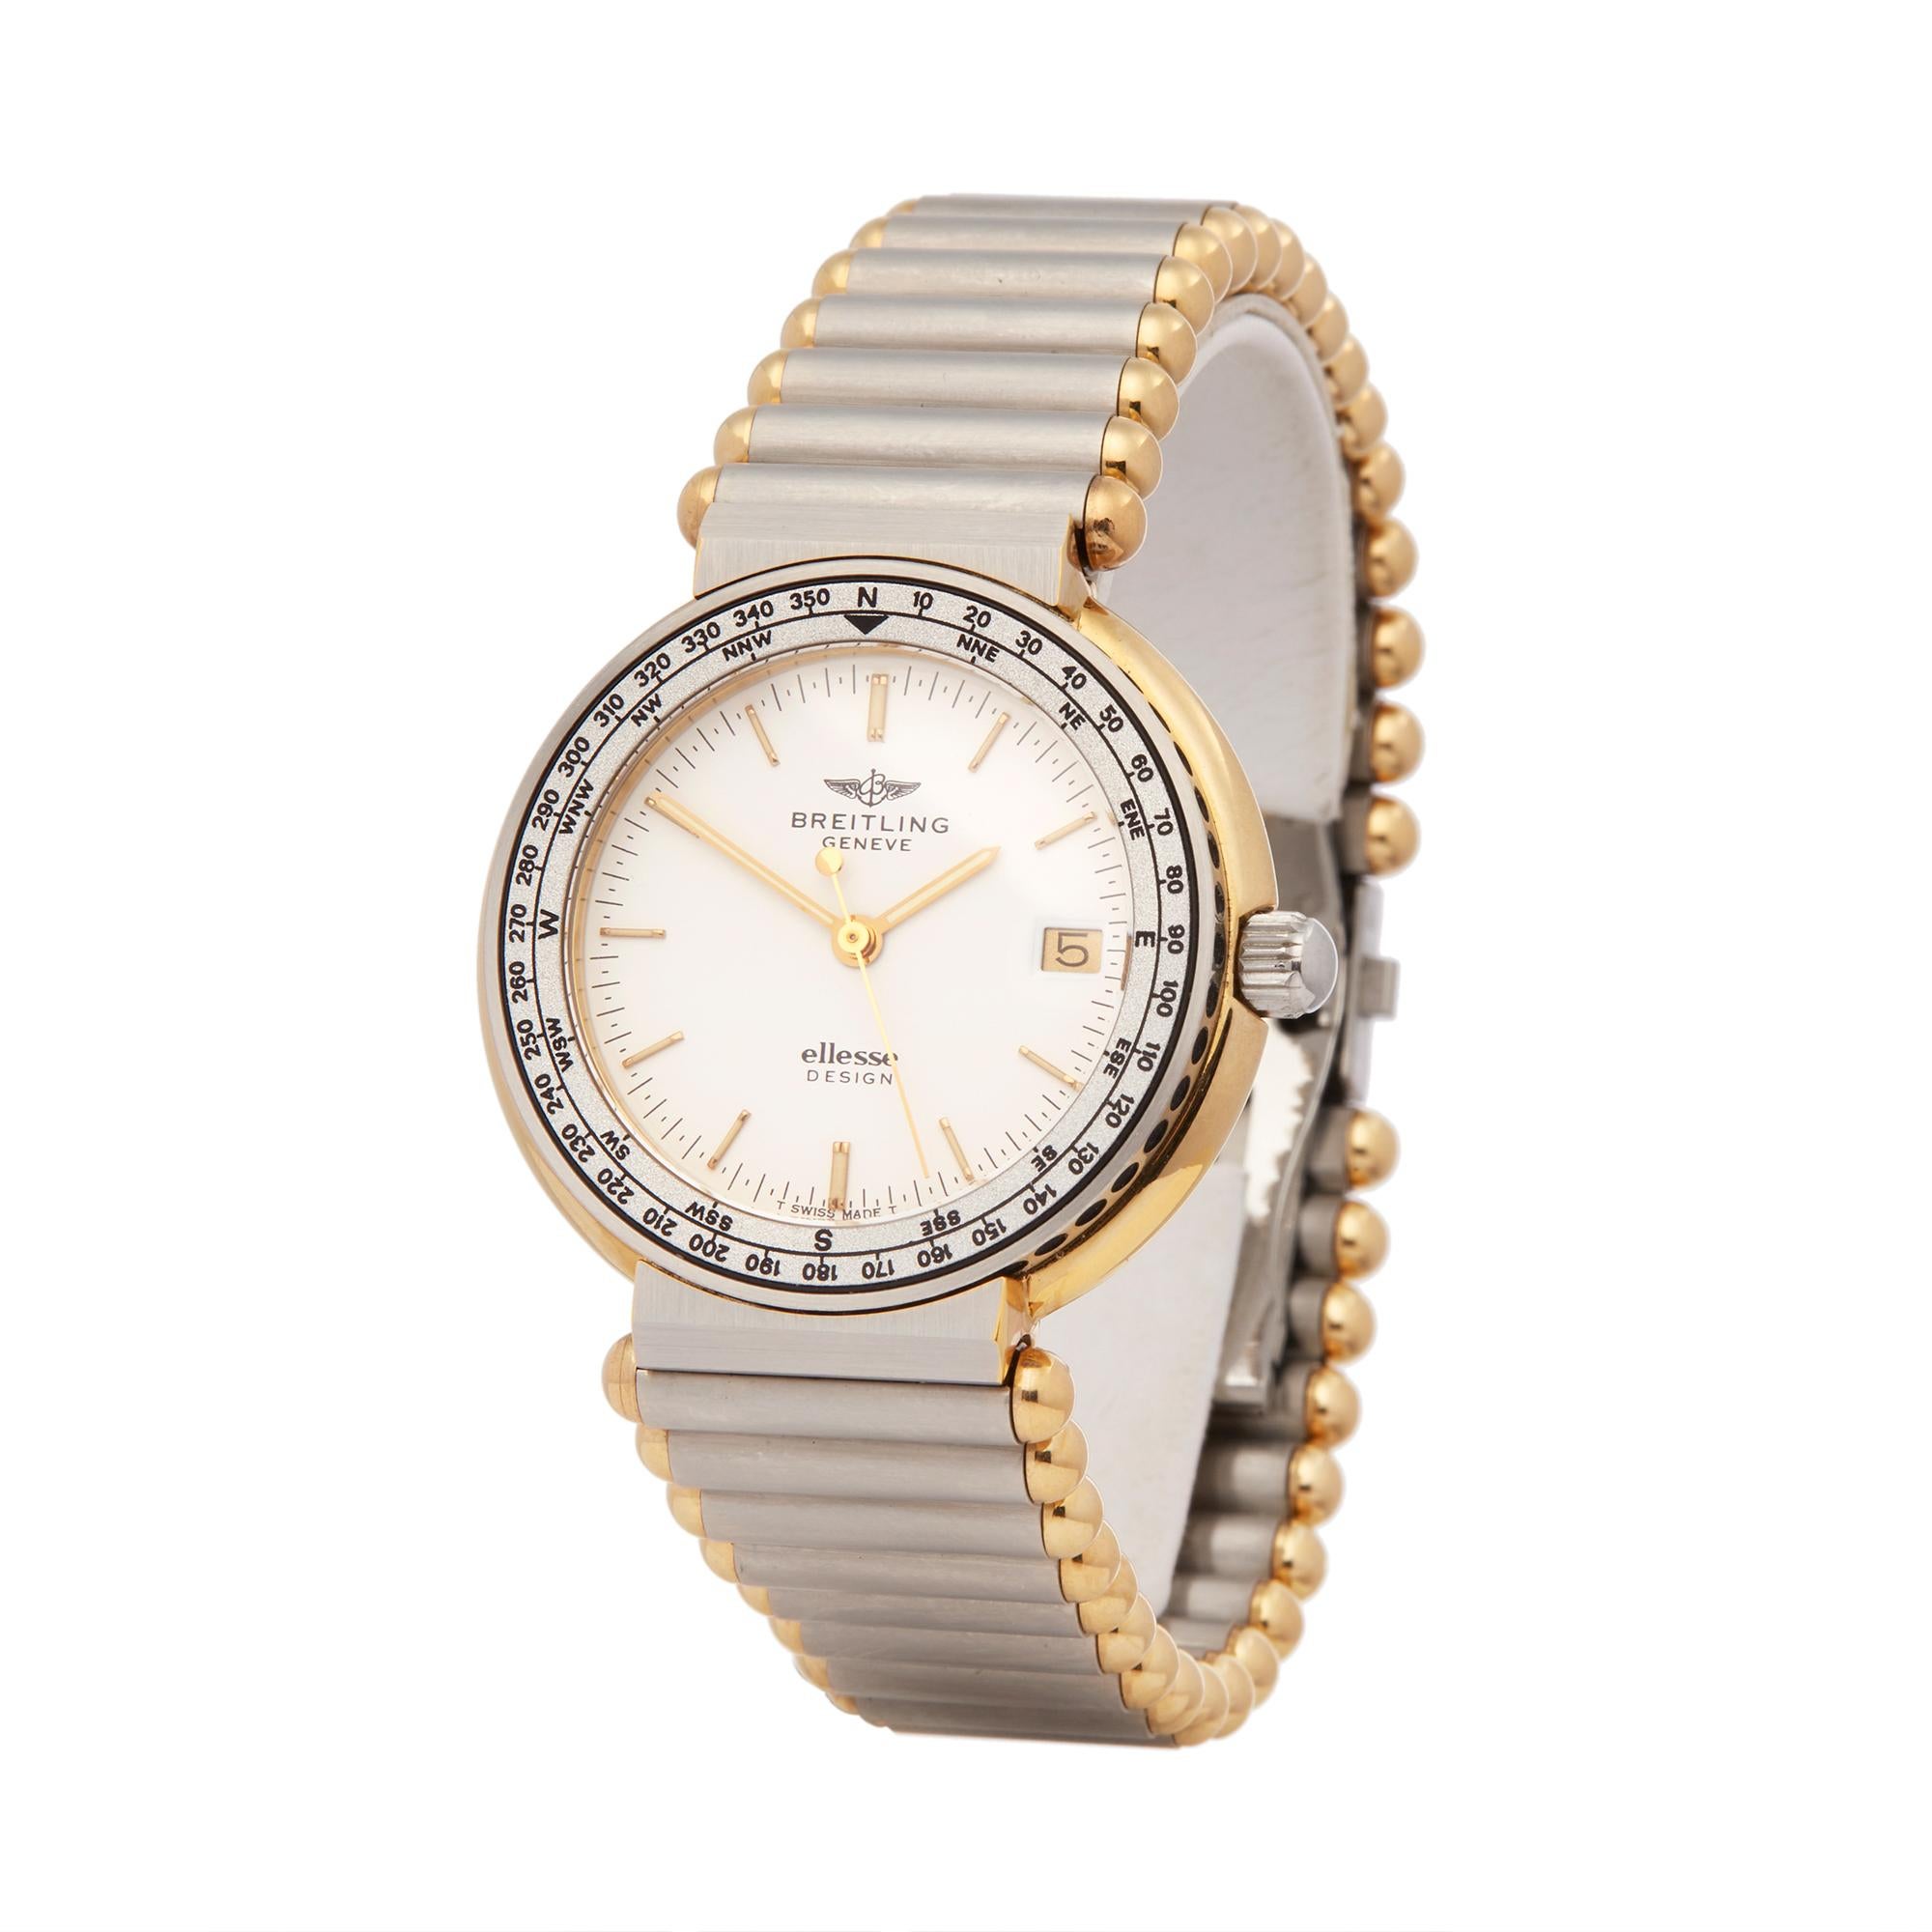 Reference: COM2031
Manufacturer: RBreitling
Model: Archap
Model Reference: 82270
Age: Circa 1980's
Gender: Unisex
Box and Papers: Breitling Service Pouch
Dial: White Baton
Glass: Sapphire Crystal
Movement: Quartz
Water Resistance: To Manufacturers